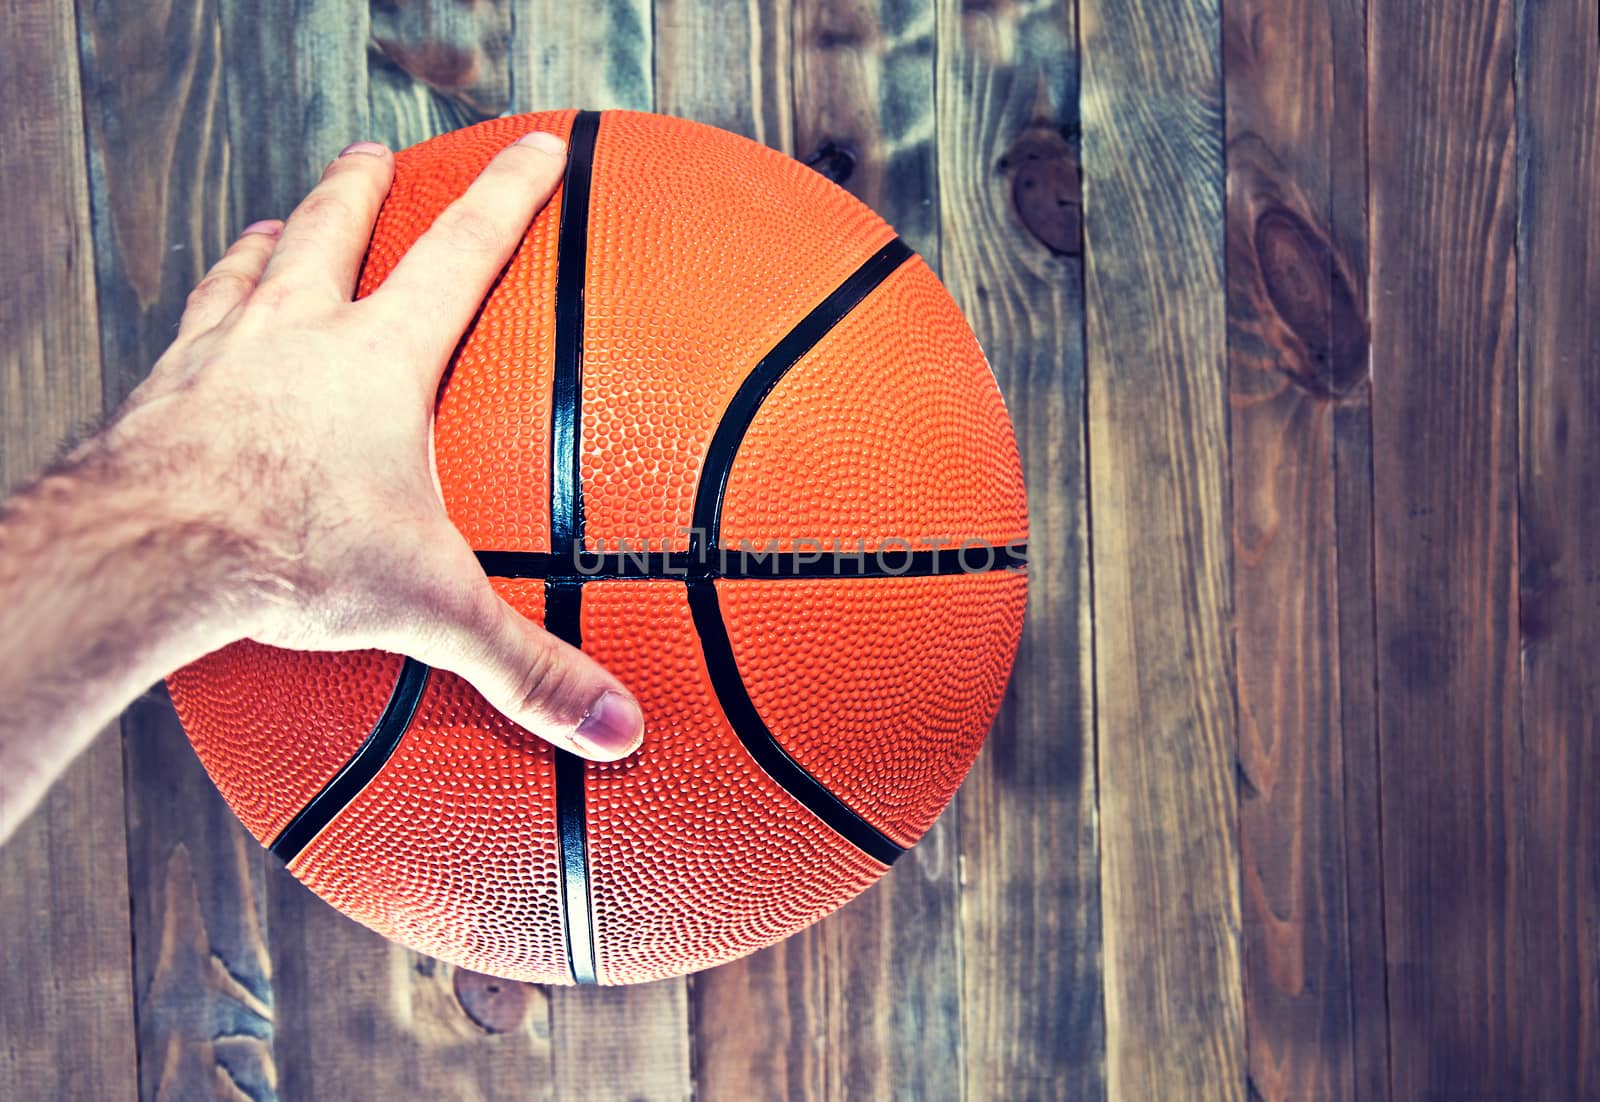 Basketball ball on wooden hardwood floor in the basketball court grabbing by hand. Retro vintage picture. Sport concept.